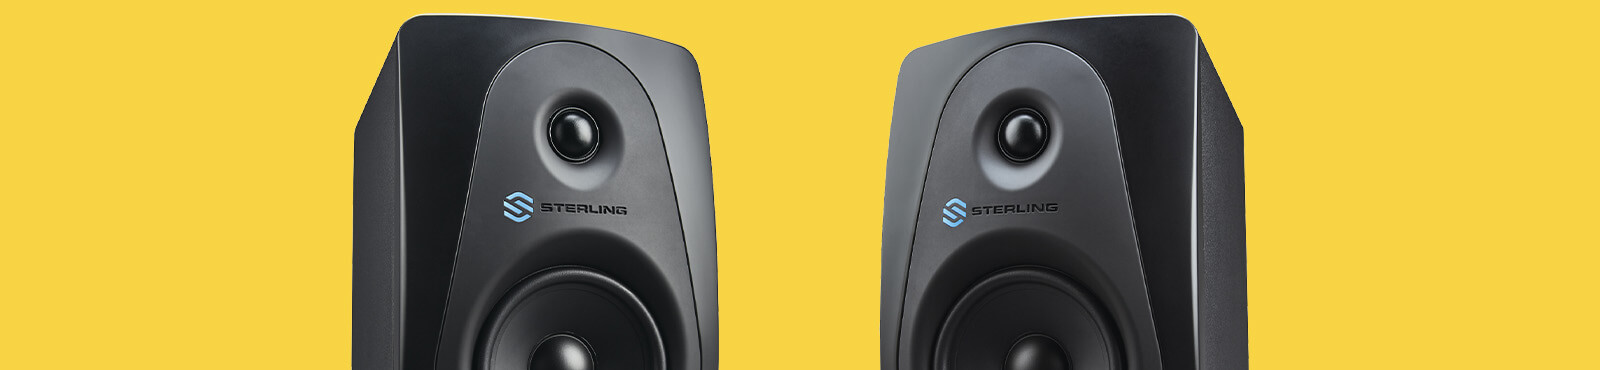 Sterling MX5 5-inch powered studio monitor right and left on wide yellow background.